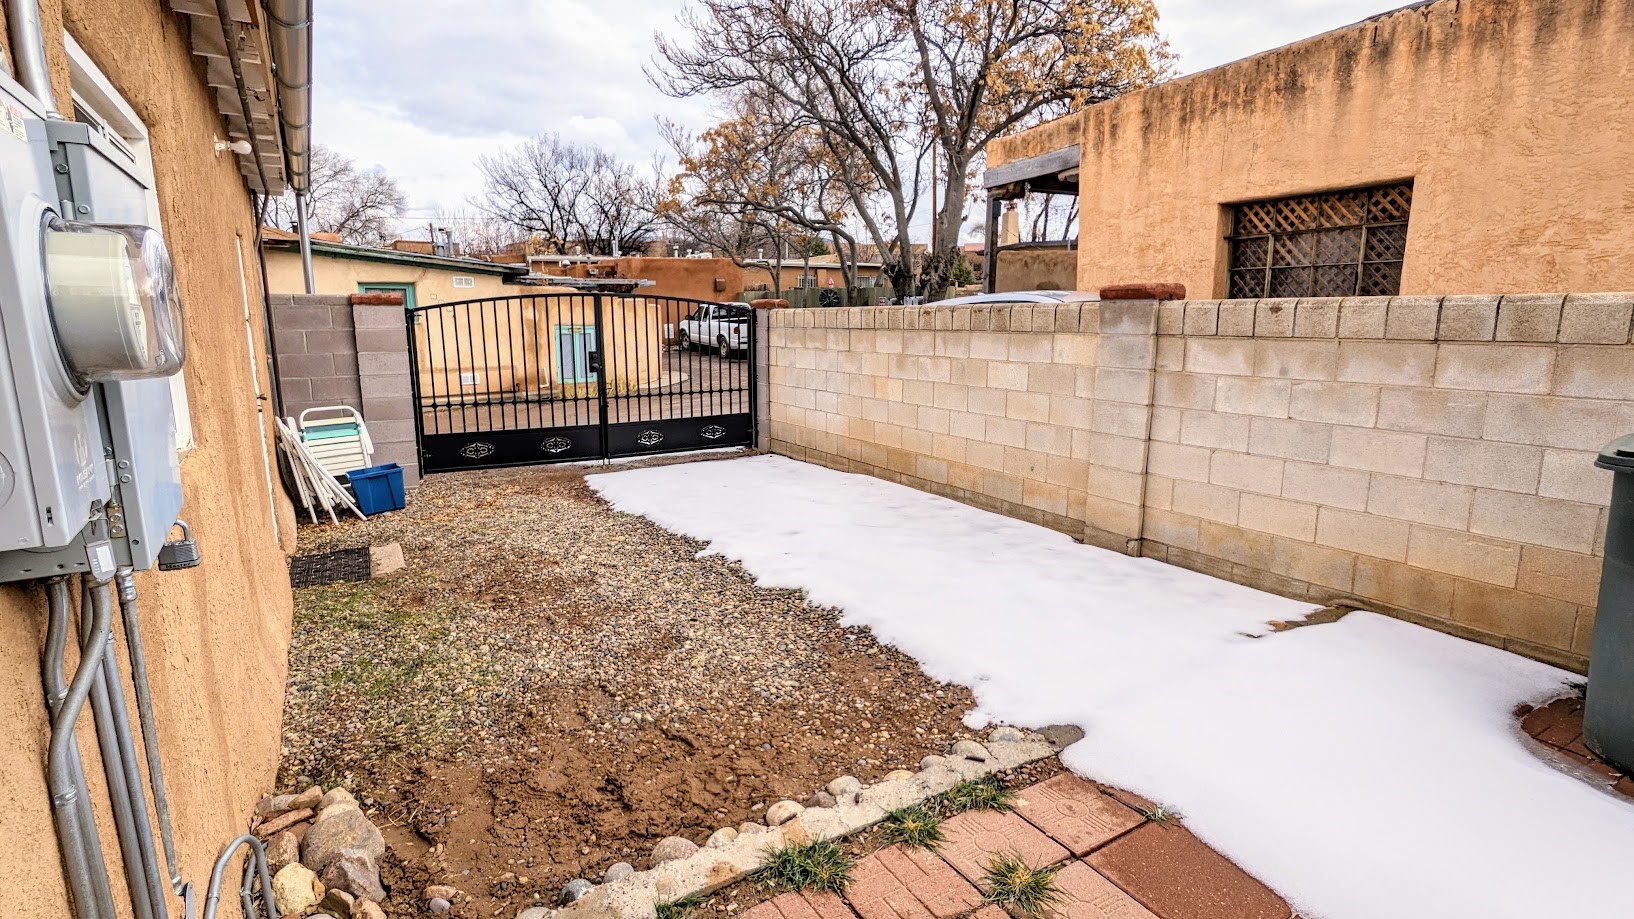 730 Agua Fria Street, Santa Fe, New Mexico 87501, 2 Bedrooms Bedrooms, ,1 BathroomBathrooms,Residential,For Sale,730 Agua Fria Street,202400342